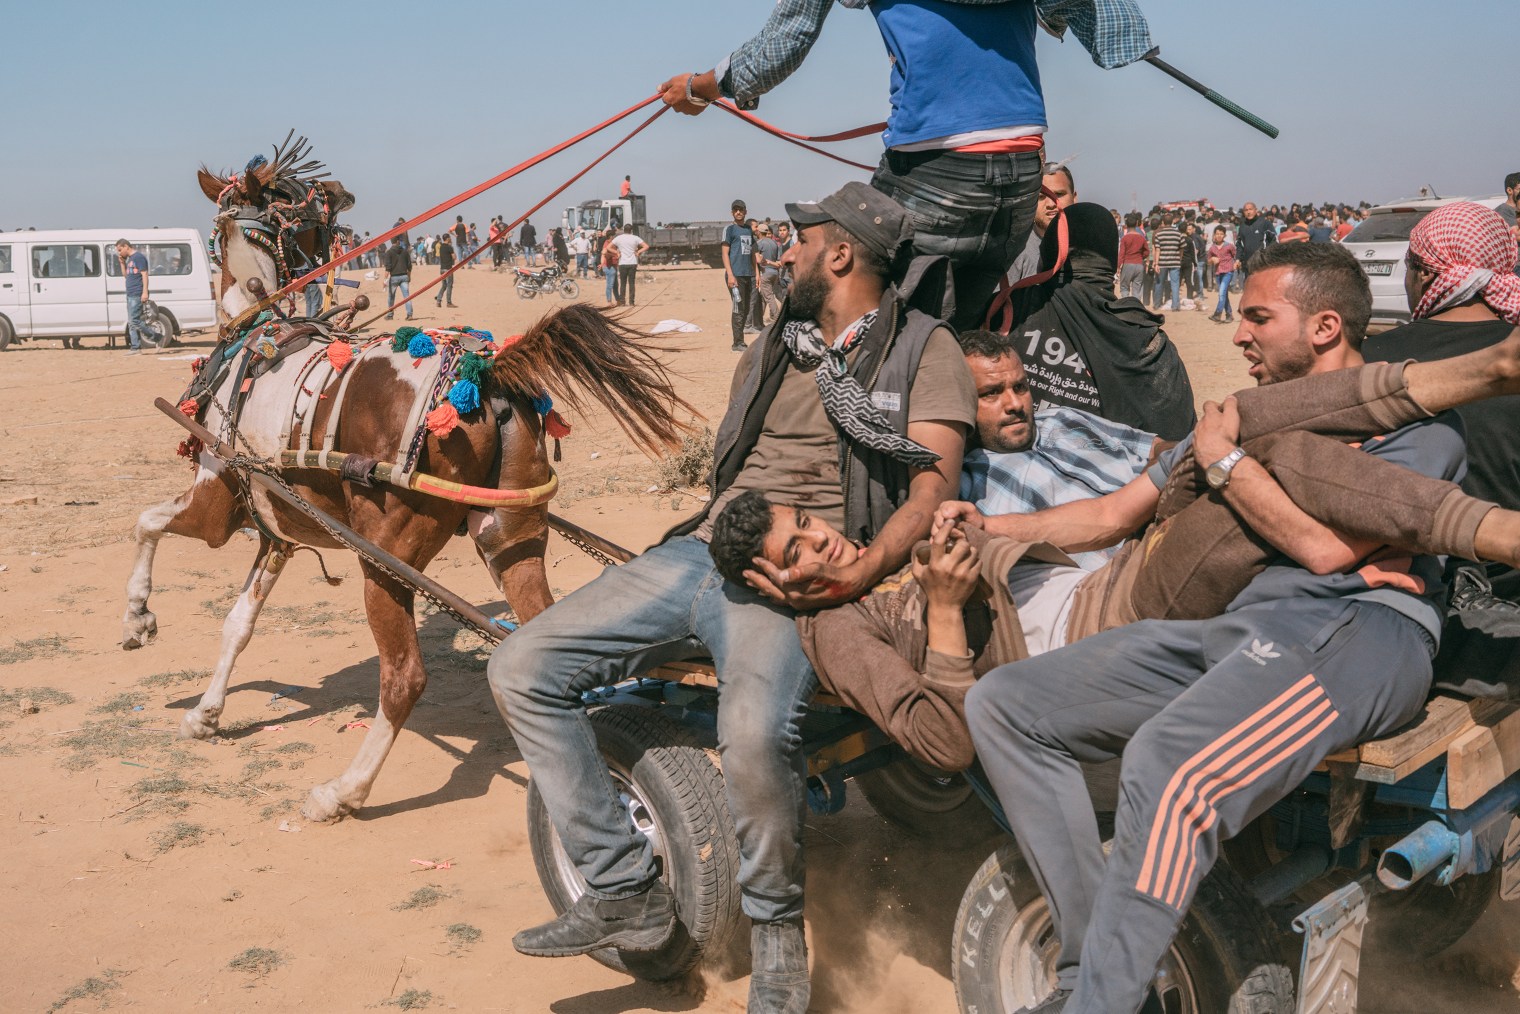 As the U.S. opened a new embassy in Jerusalem on May 14, violence erupted just miles away at the Gaza border, where Israeli soldiers clashed with Palestinian protesters like this injured man, who was evacuated by horse cart.